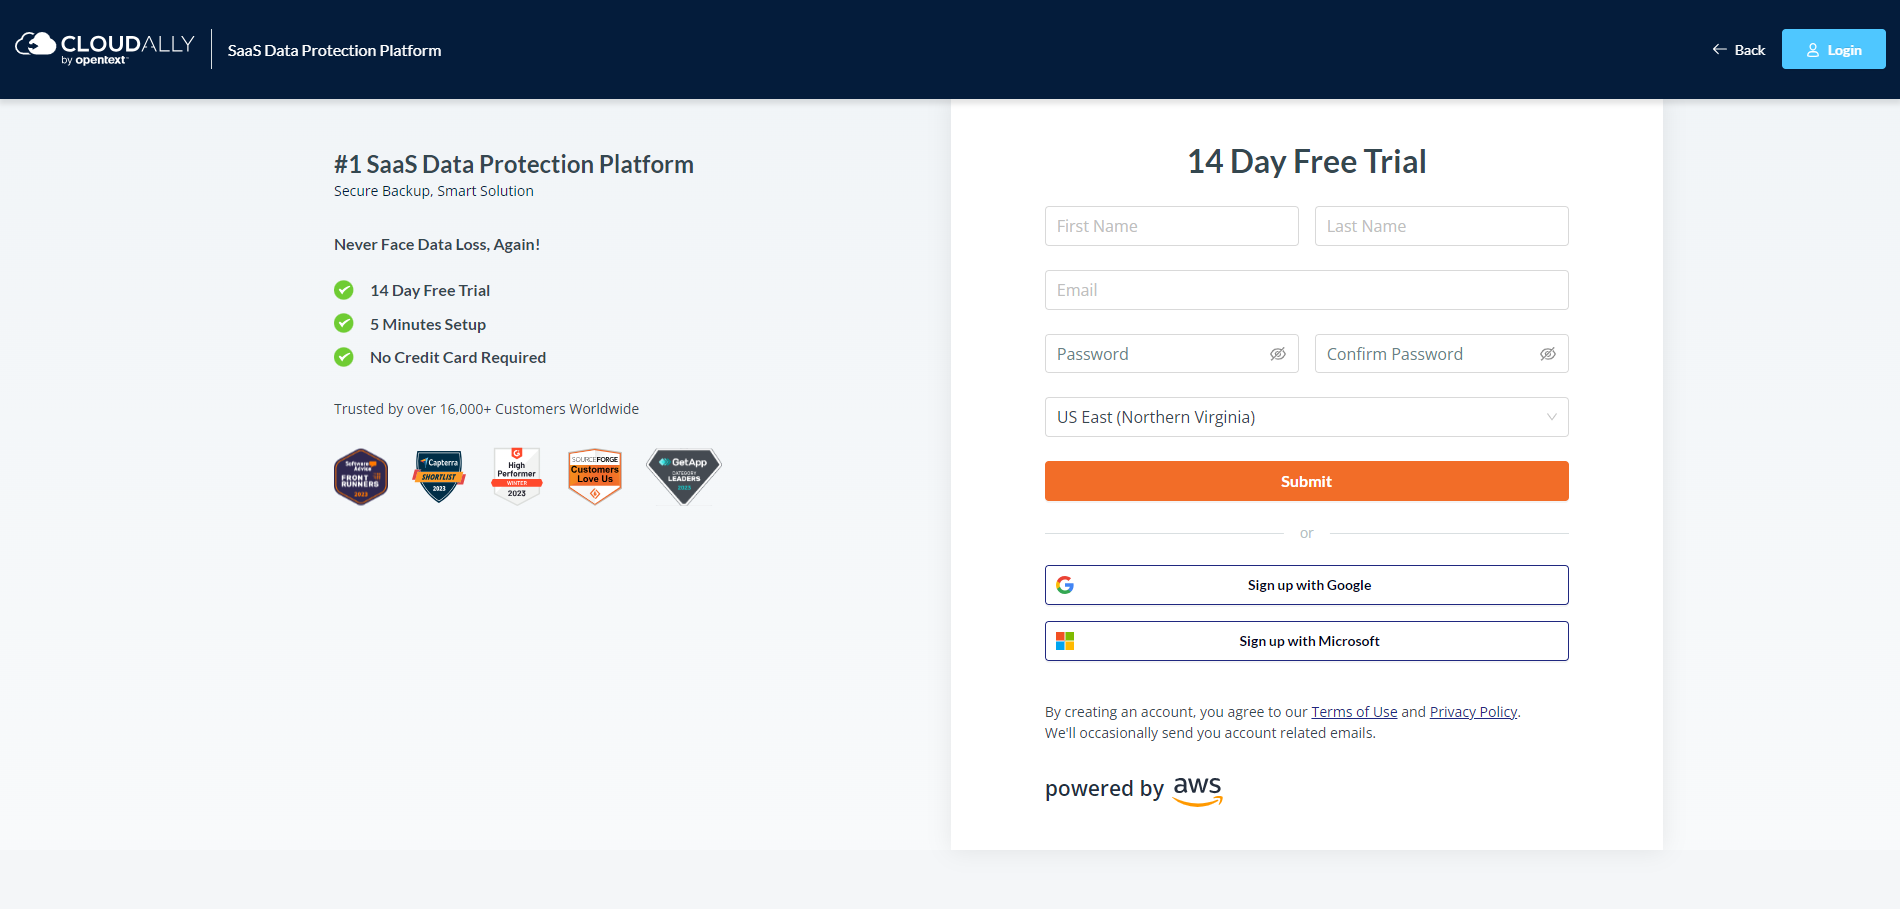 14 day free trial page